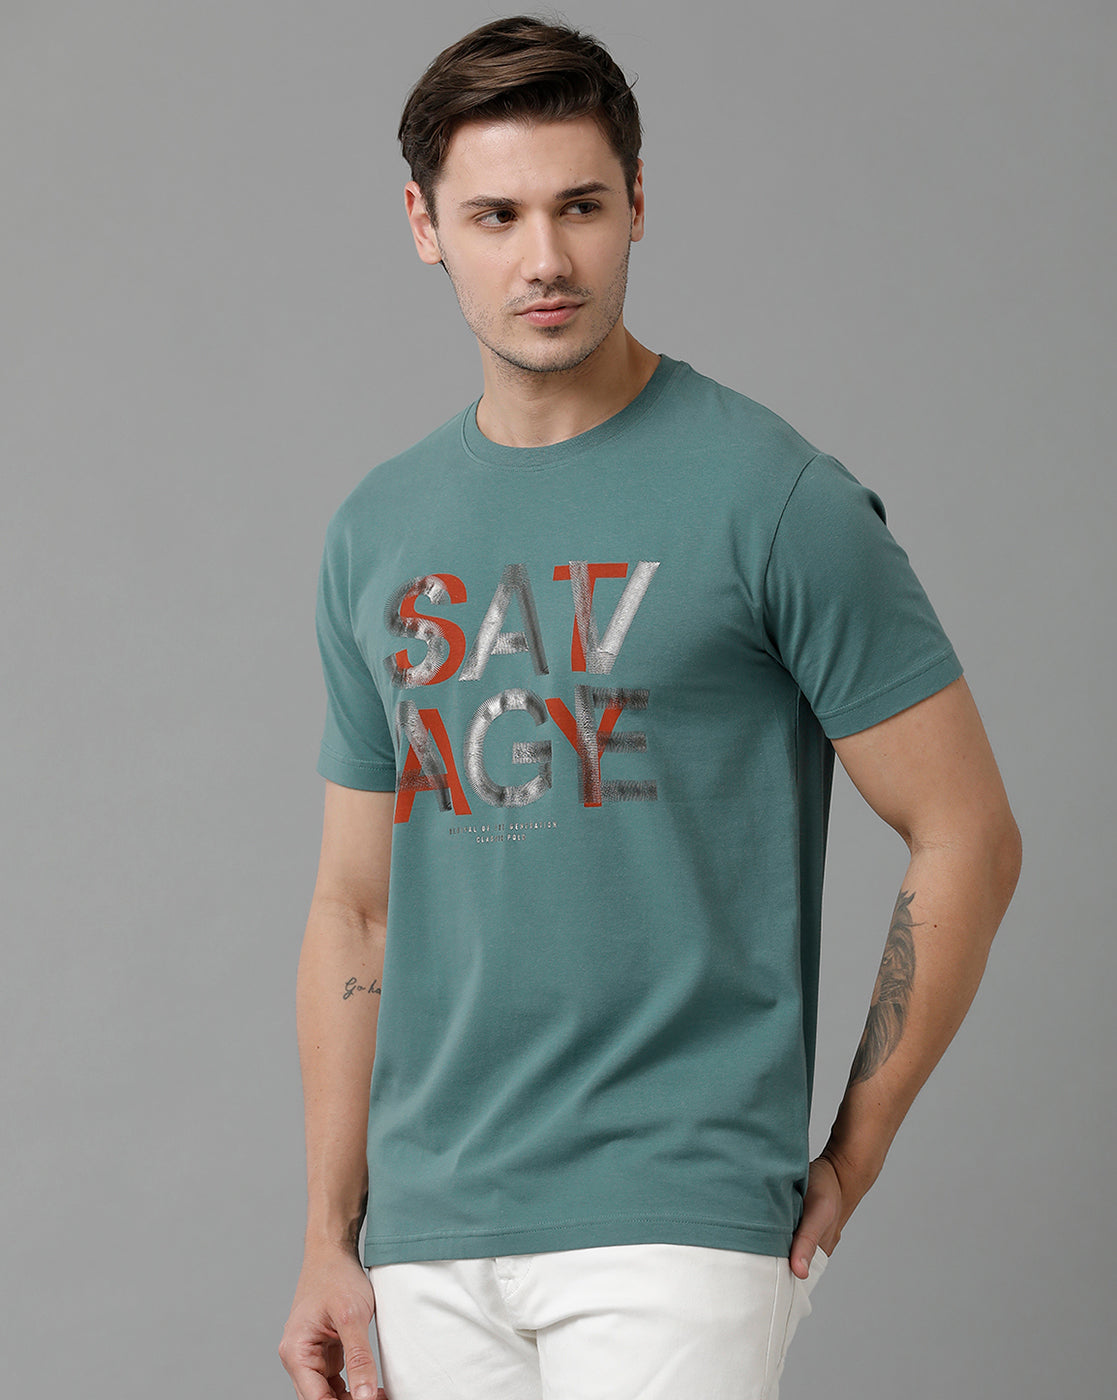 Classic Polo Men's Cotton Half Sleeve Printed Slim Fit Round Neck Grey Color T-Shirt | Baleno - 497 B